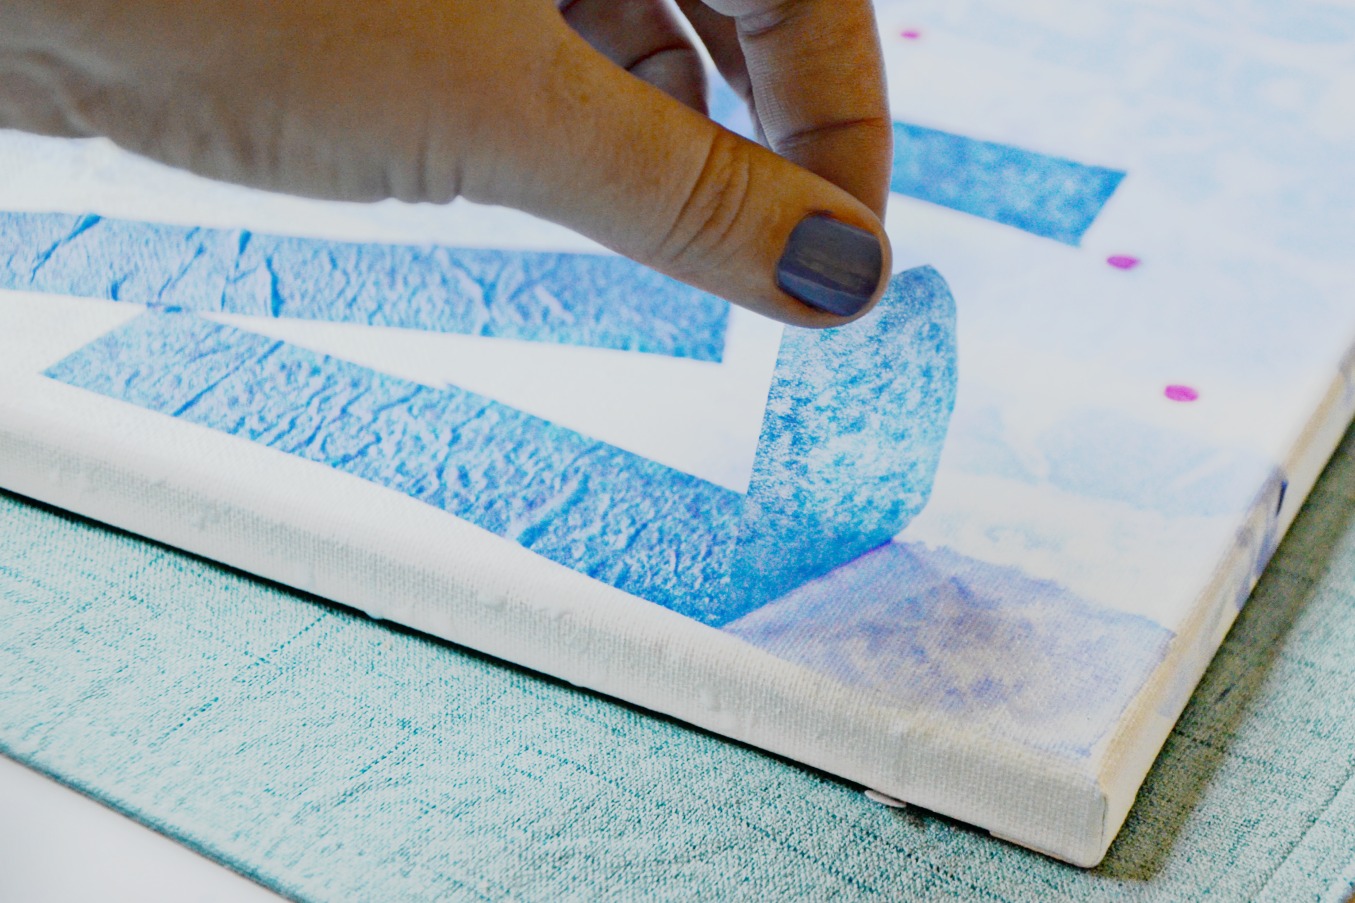 Make this easy photo inspired tissue paper transfer art with tissue paper and rubbing alcohol for a perfect handmade gift.